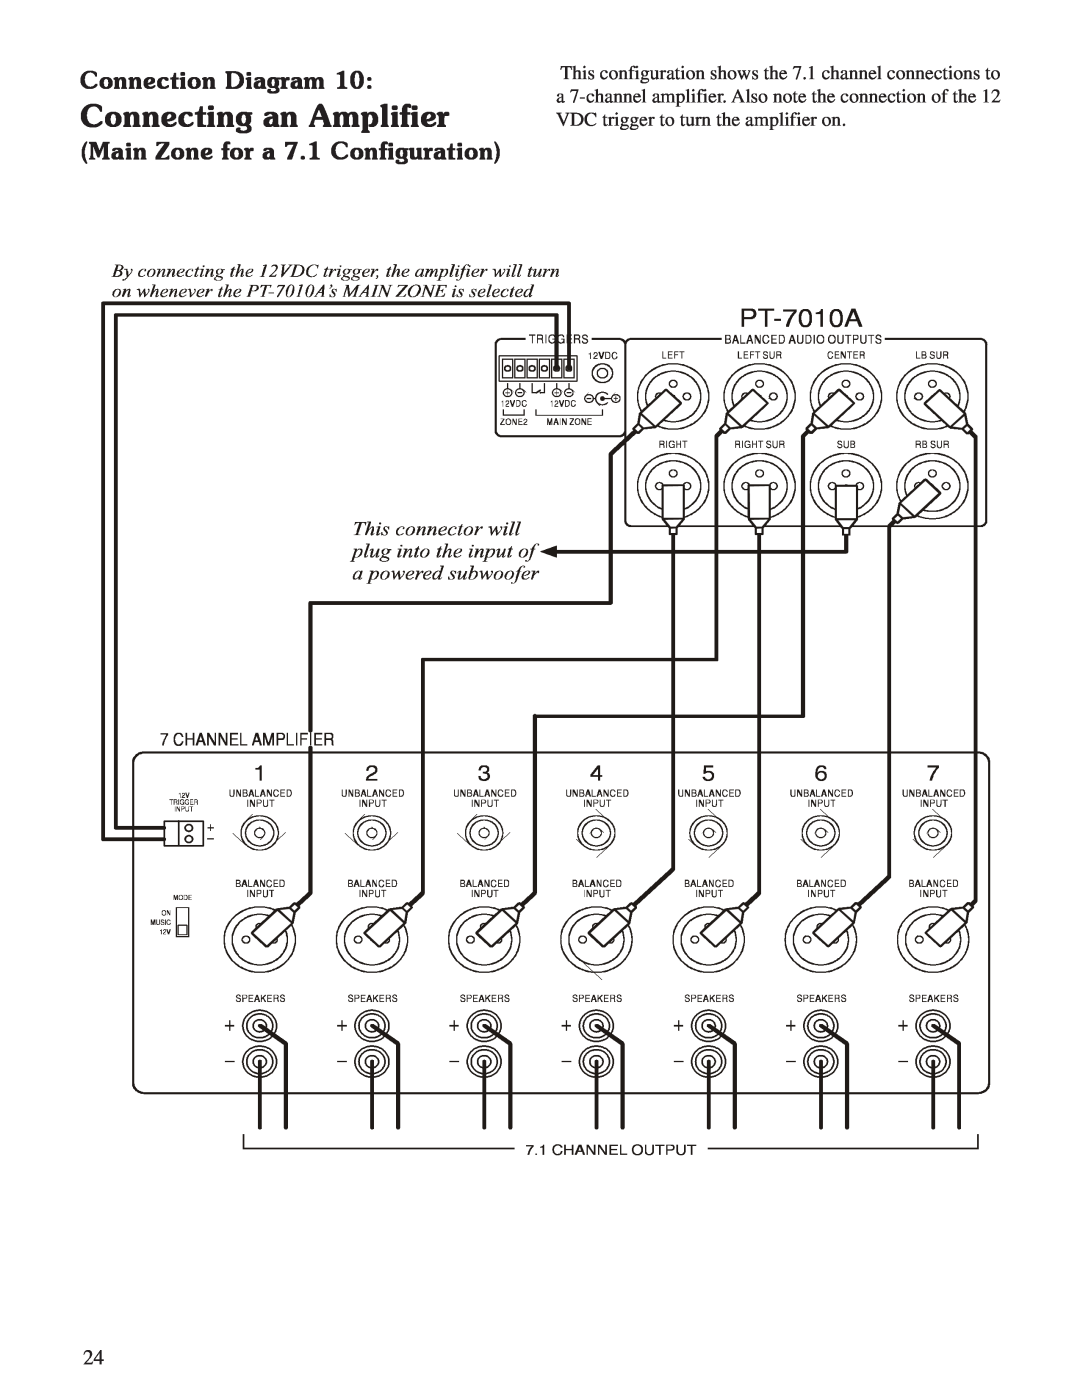 Sherbourn Technologies PT-7010A owner manual Main Zone for a 7.1 Configuration, Connecting an Amplifier, Connection Diagram 